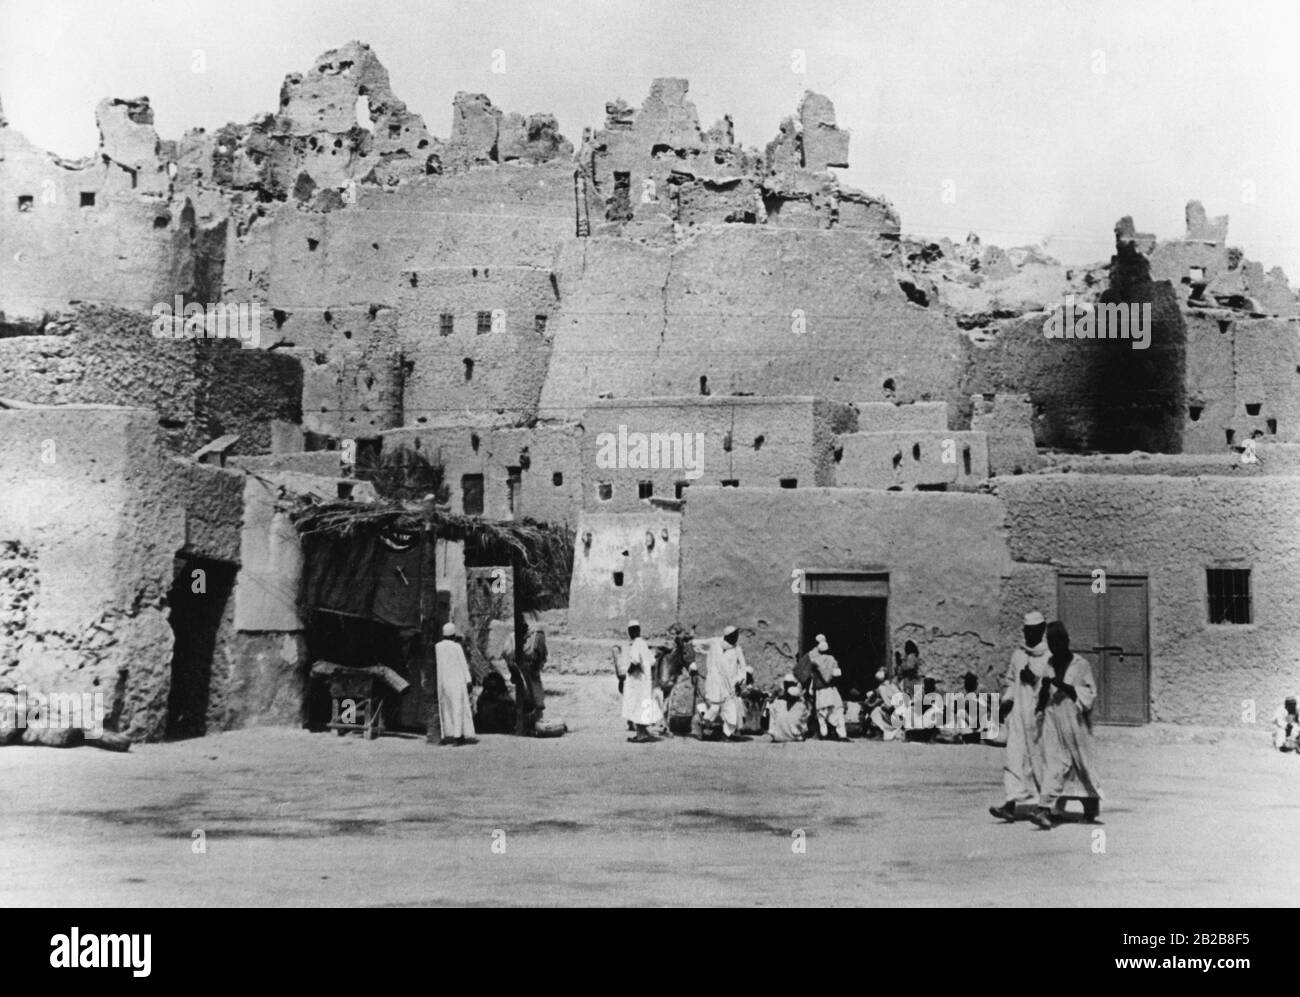 The old town of Siwa in northwest Egypt. The picture was taken as a propaganda shot by the war reporter L. Koch. Stock Photo